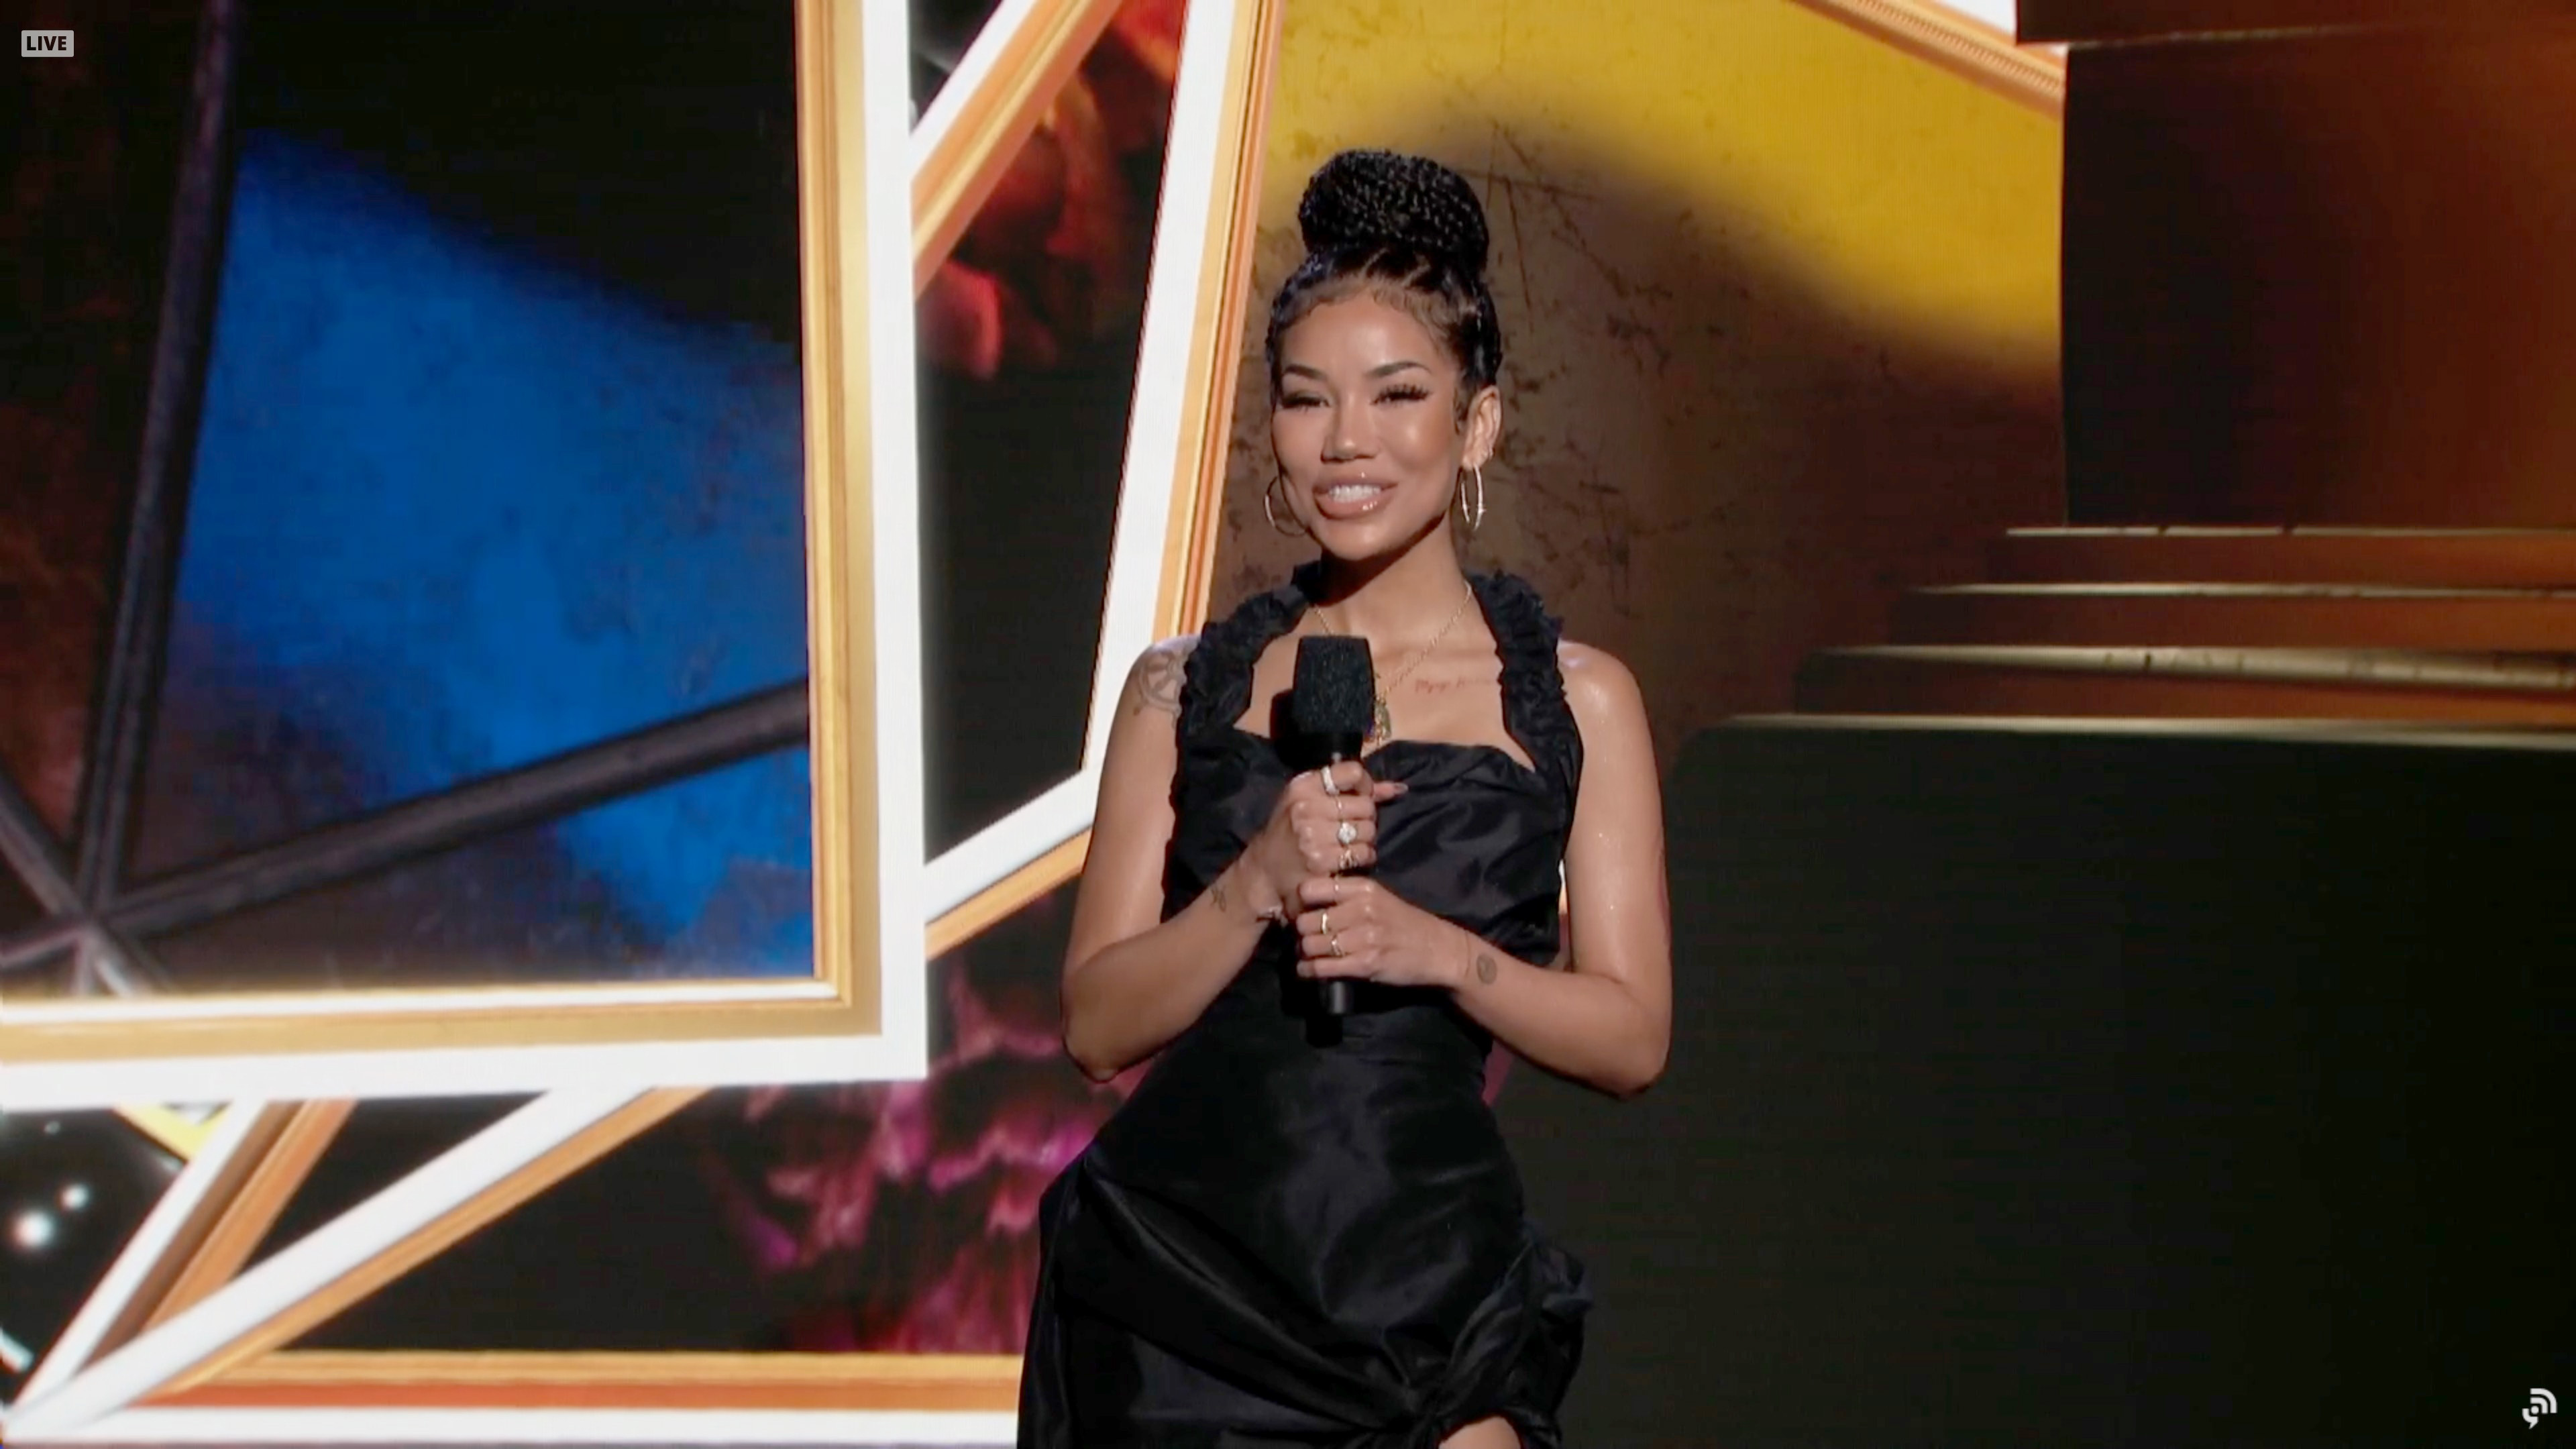 Watch Jhené Aiko perform 'America the Beautiful' at Super Bowl 2022 